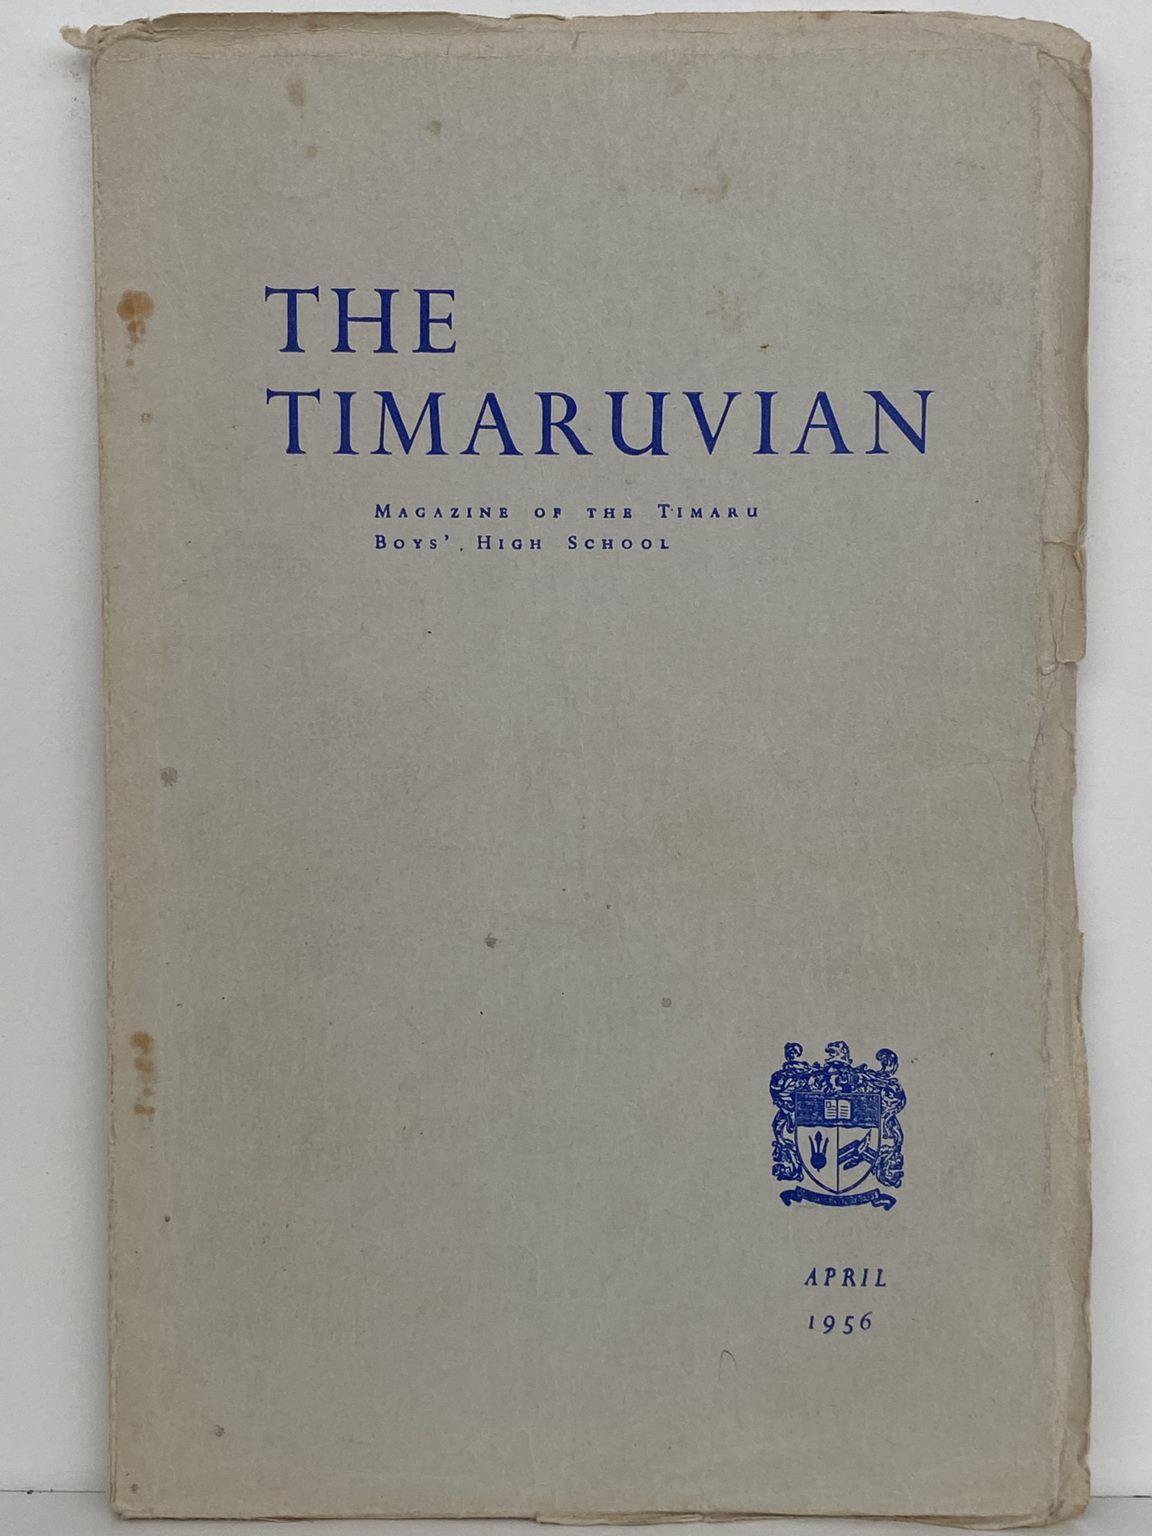 THE TIMARUVIAN: Magazine of the Timaru Boys' High School and its Old Boys' Association 1956